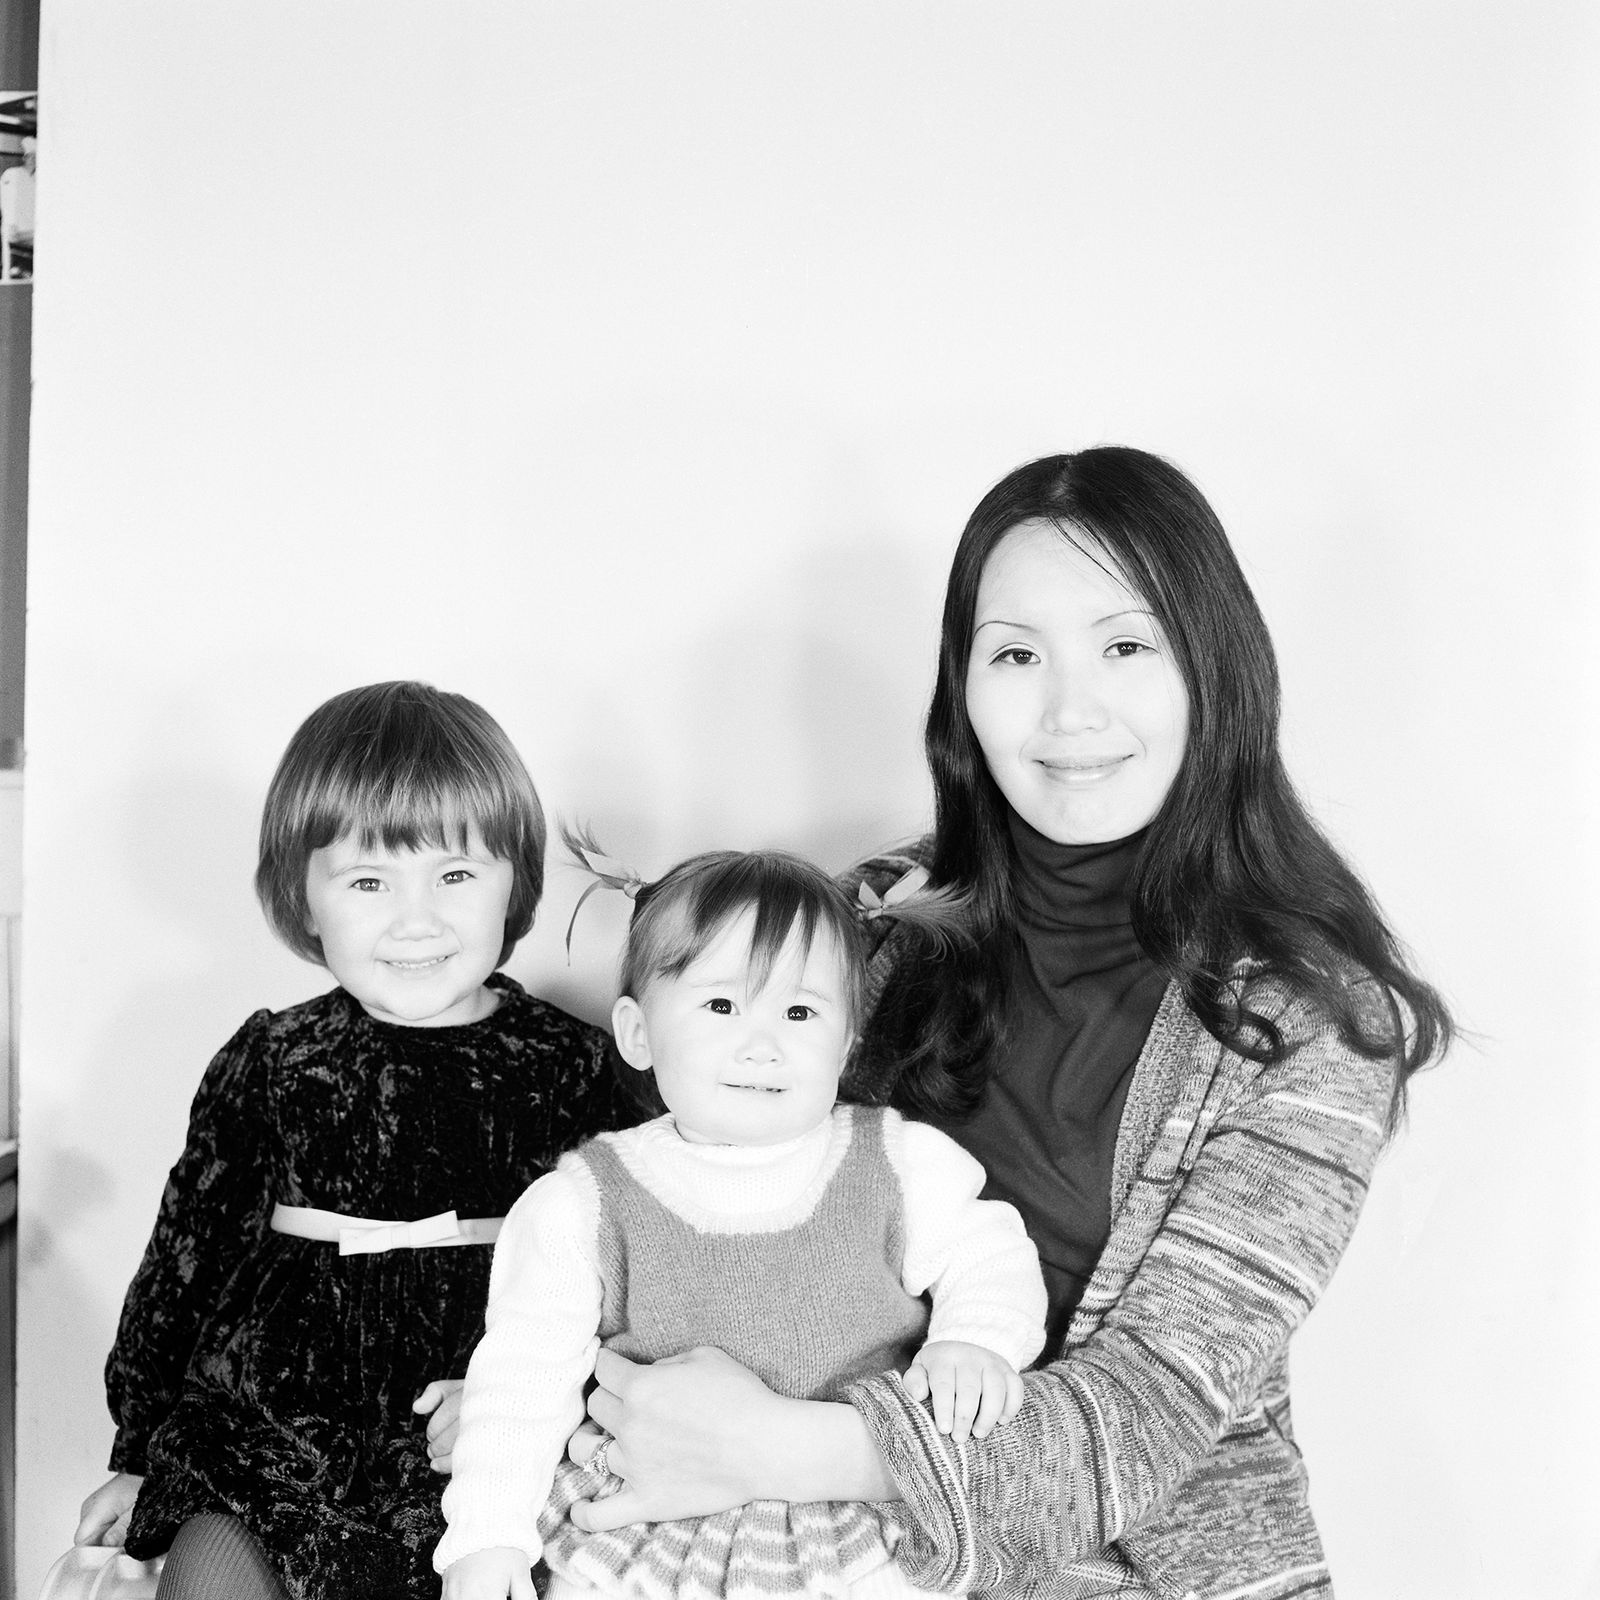 © Lee Grant - Passport photo of me, my sister and my mother, 1975